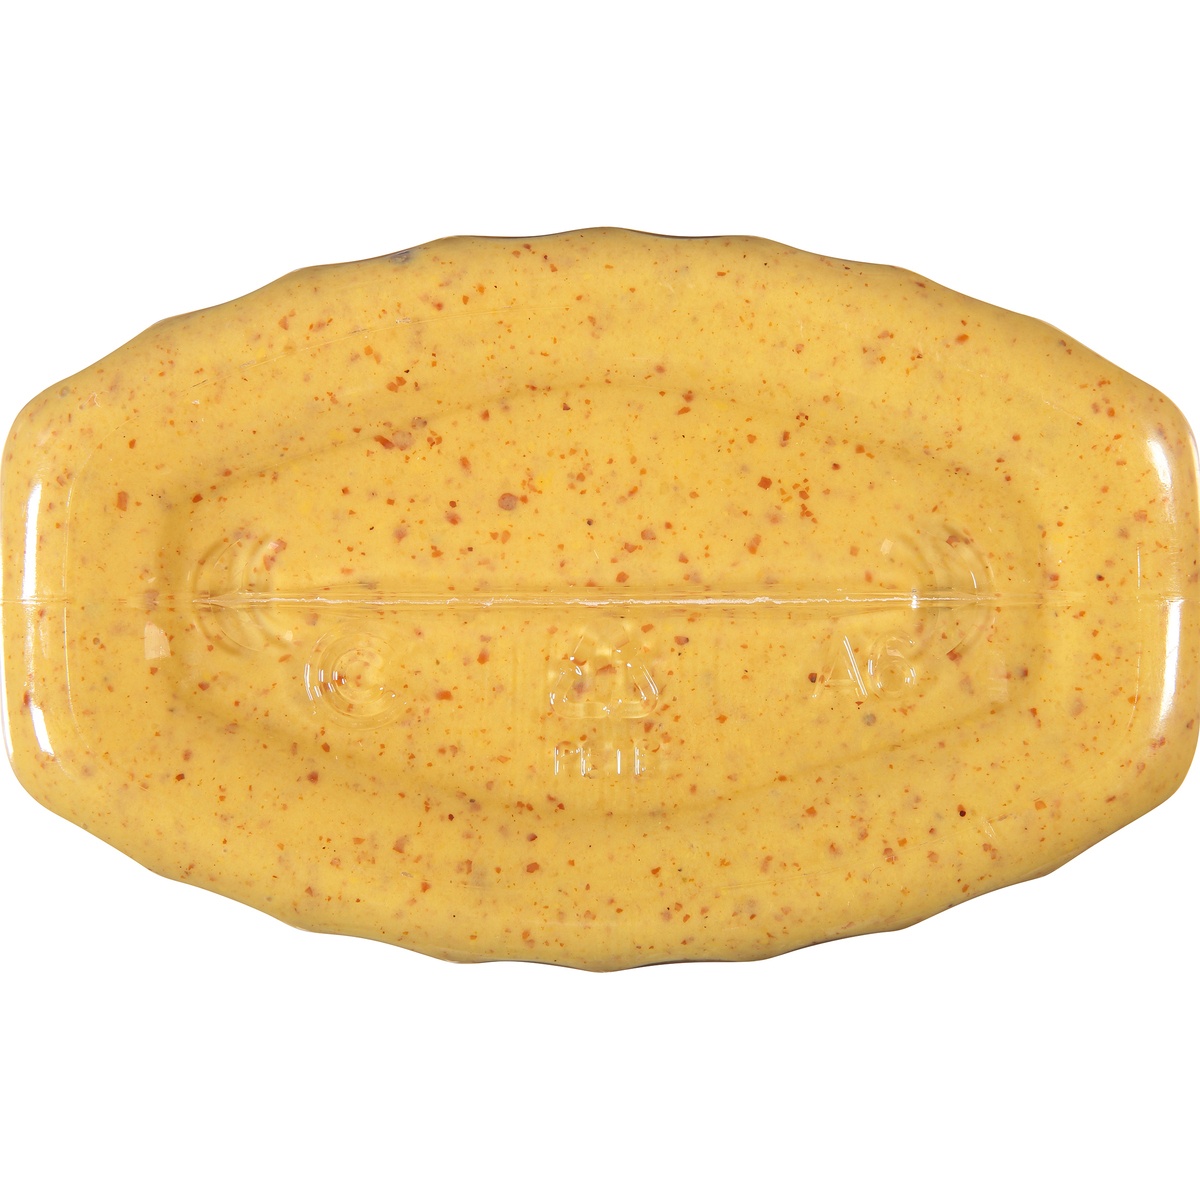 slide 8 of 11, French's Spicy Brown Mustard Squeeze Bottle, 18 oz